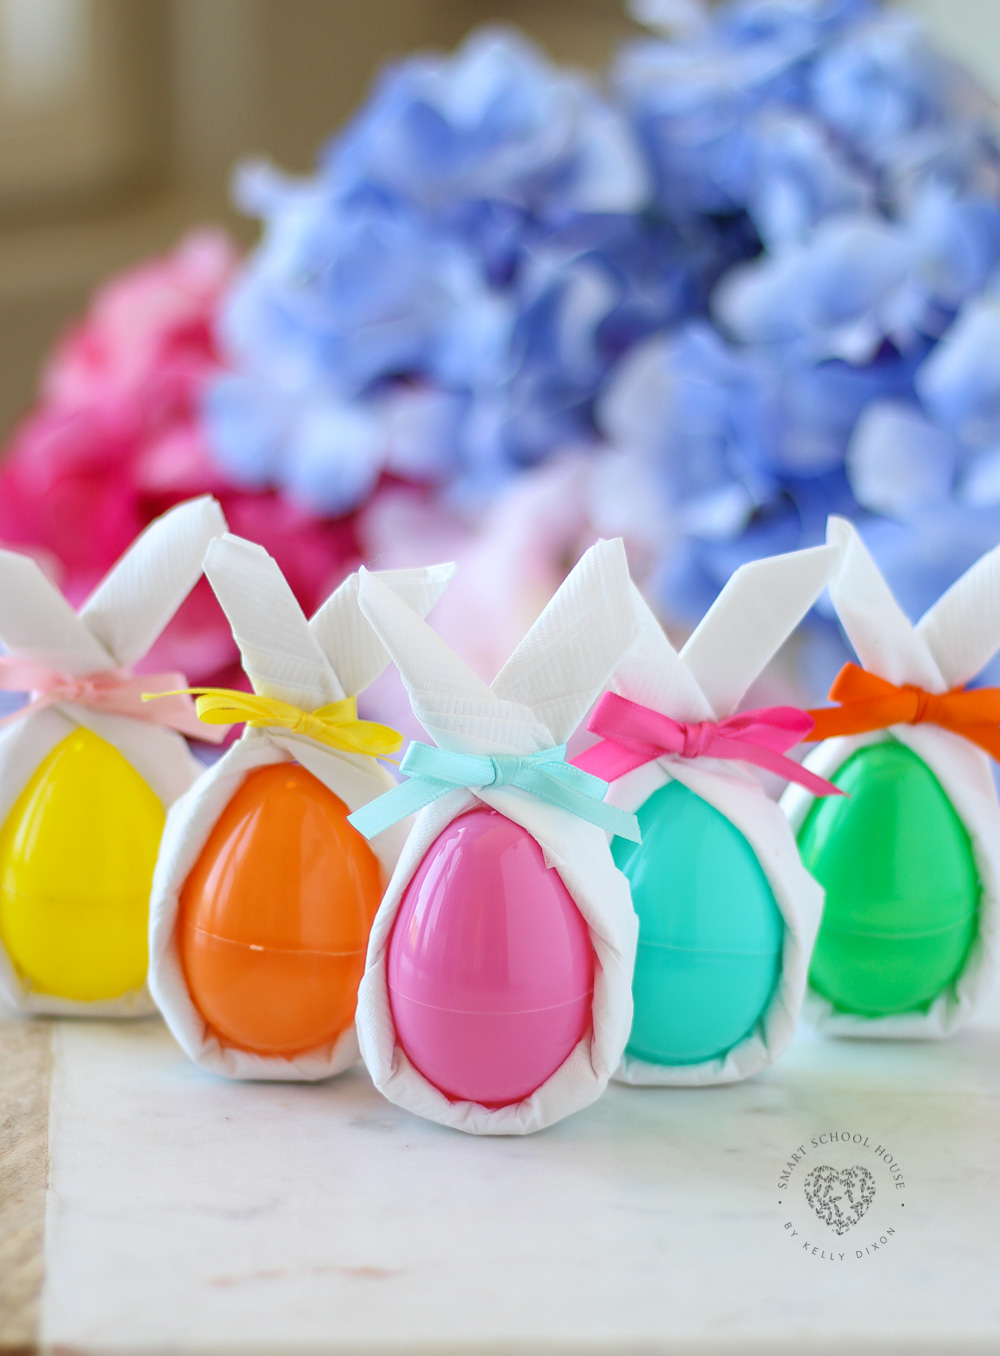 Give your plastic Easter eggs a “Wow” factor with these easy DIY bunny ear napkins! #Easter #EasterEggs #DecoratingEasterEggs #DIYEasterDecor #EasterCraft